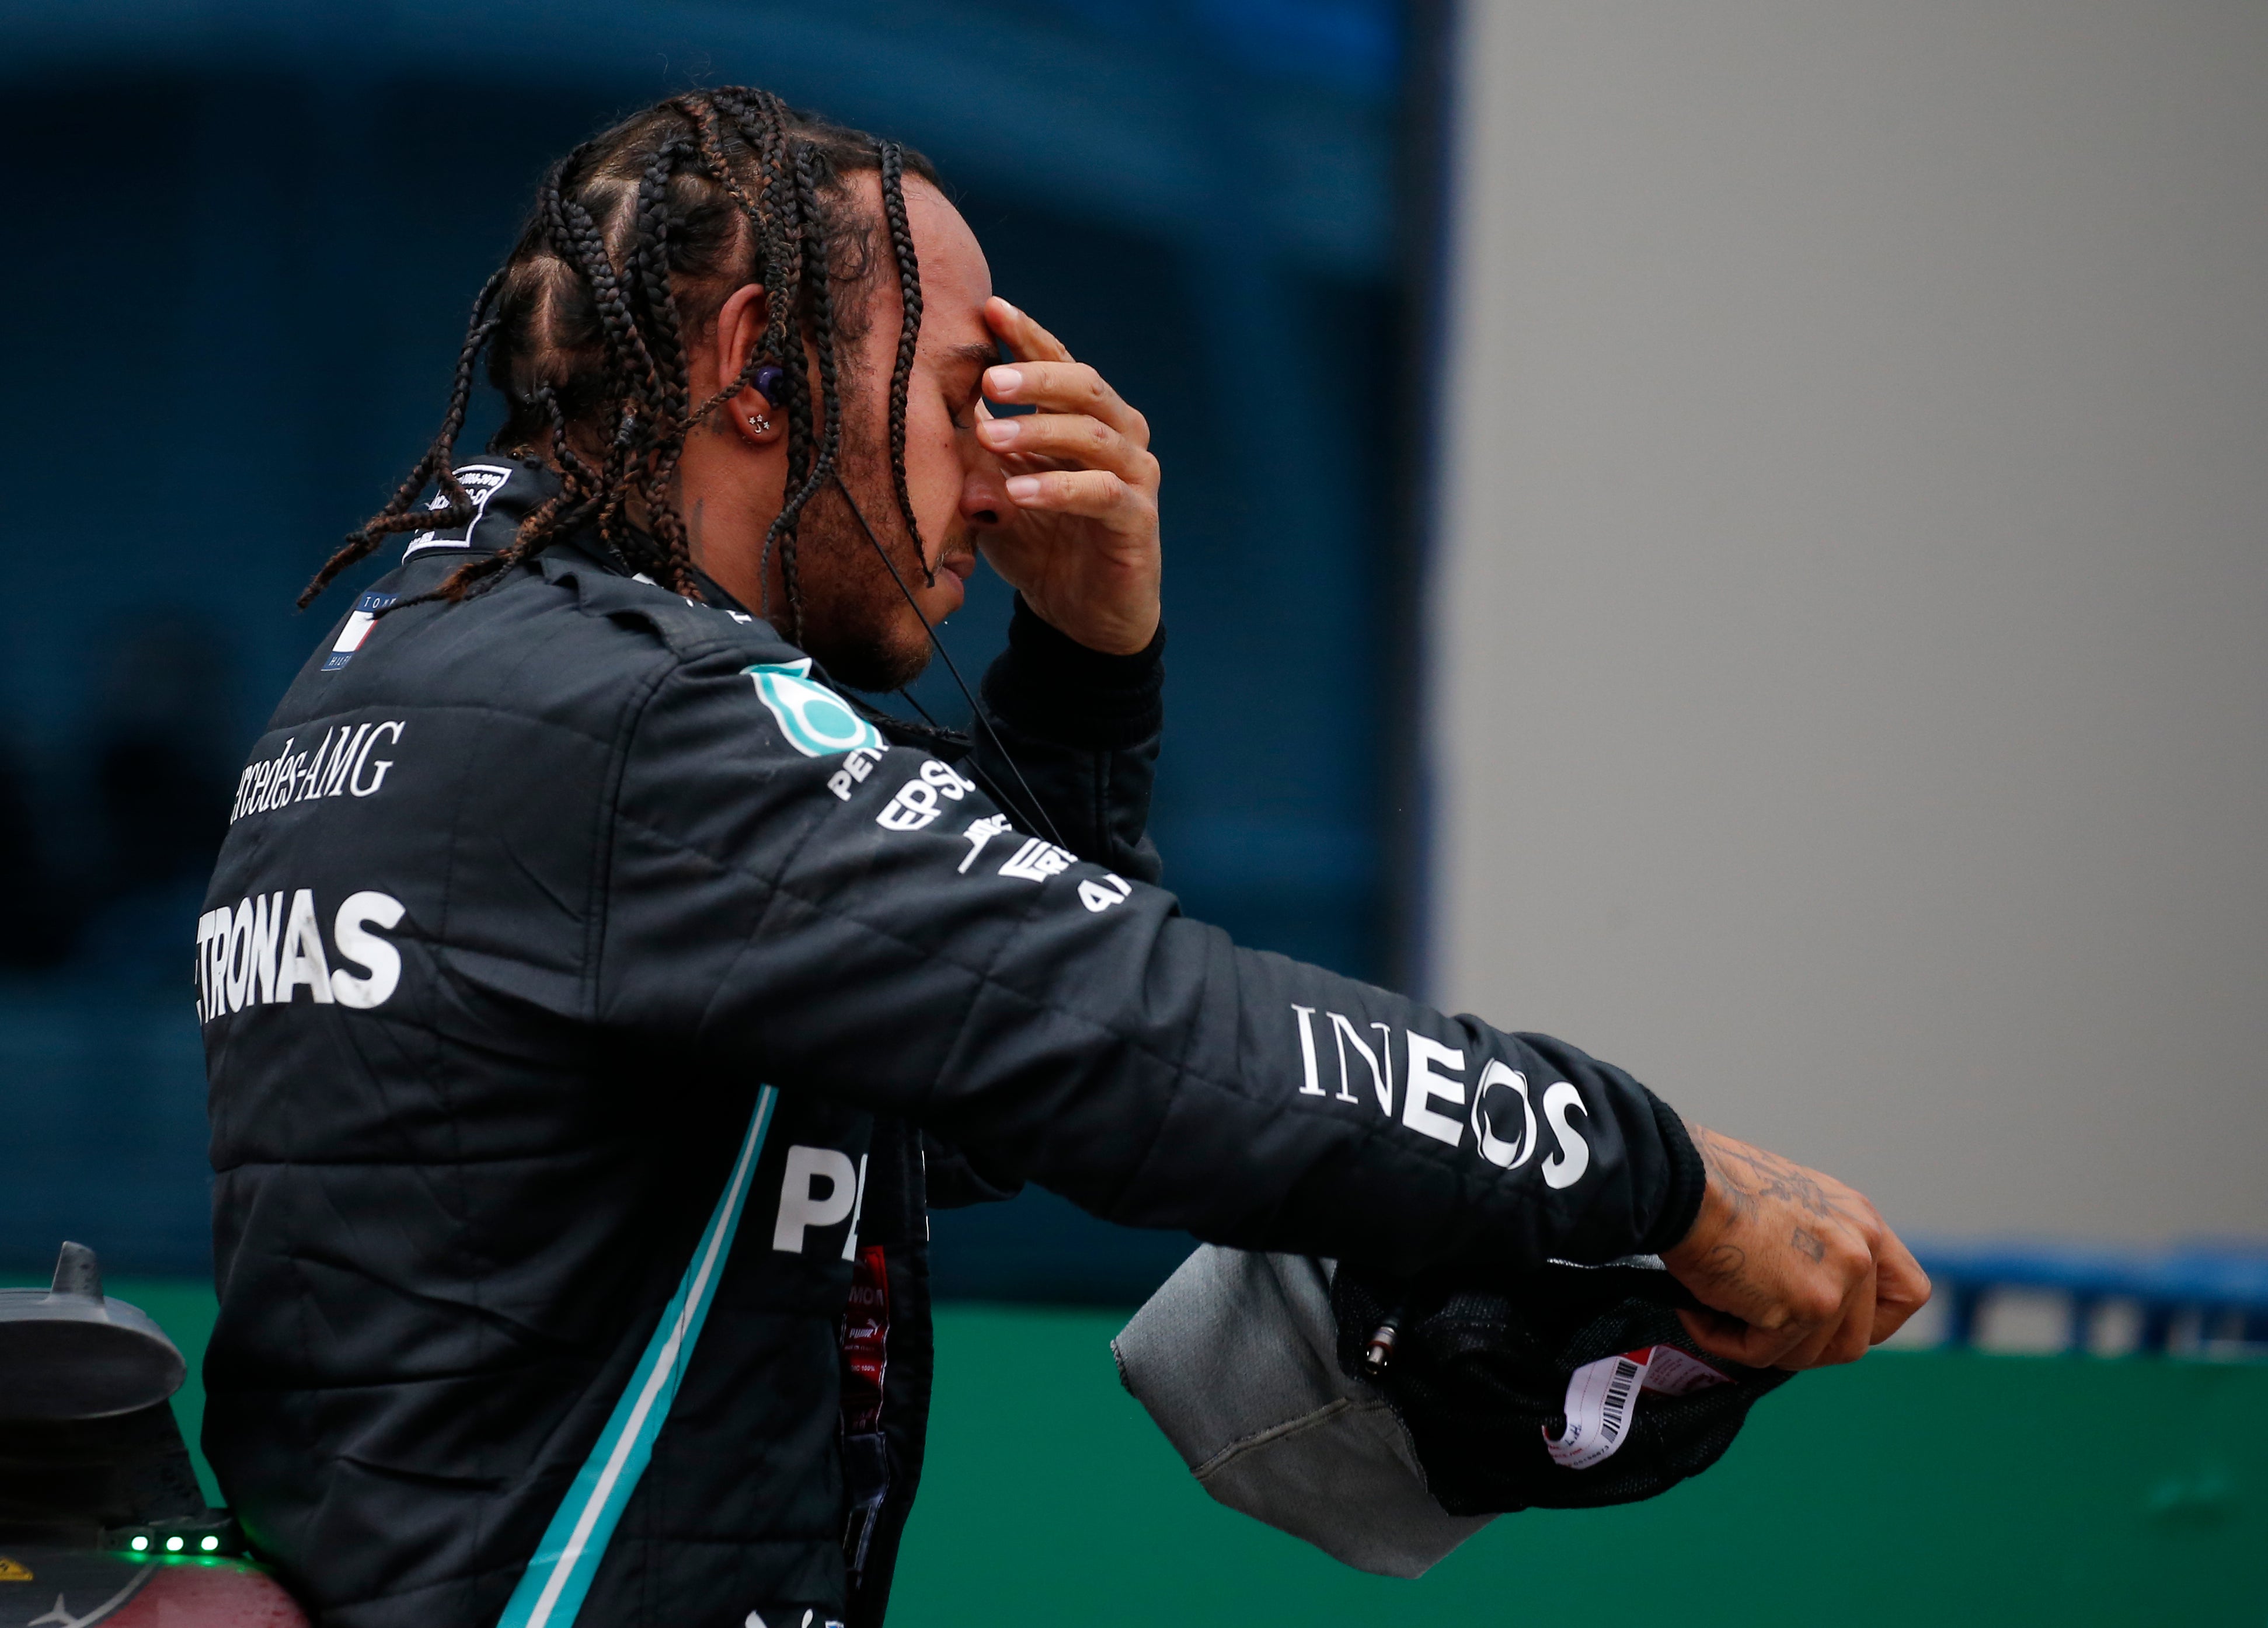 Hamilton was left in tears after winning his seventh title